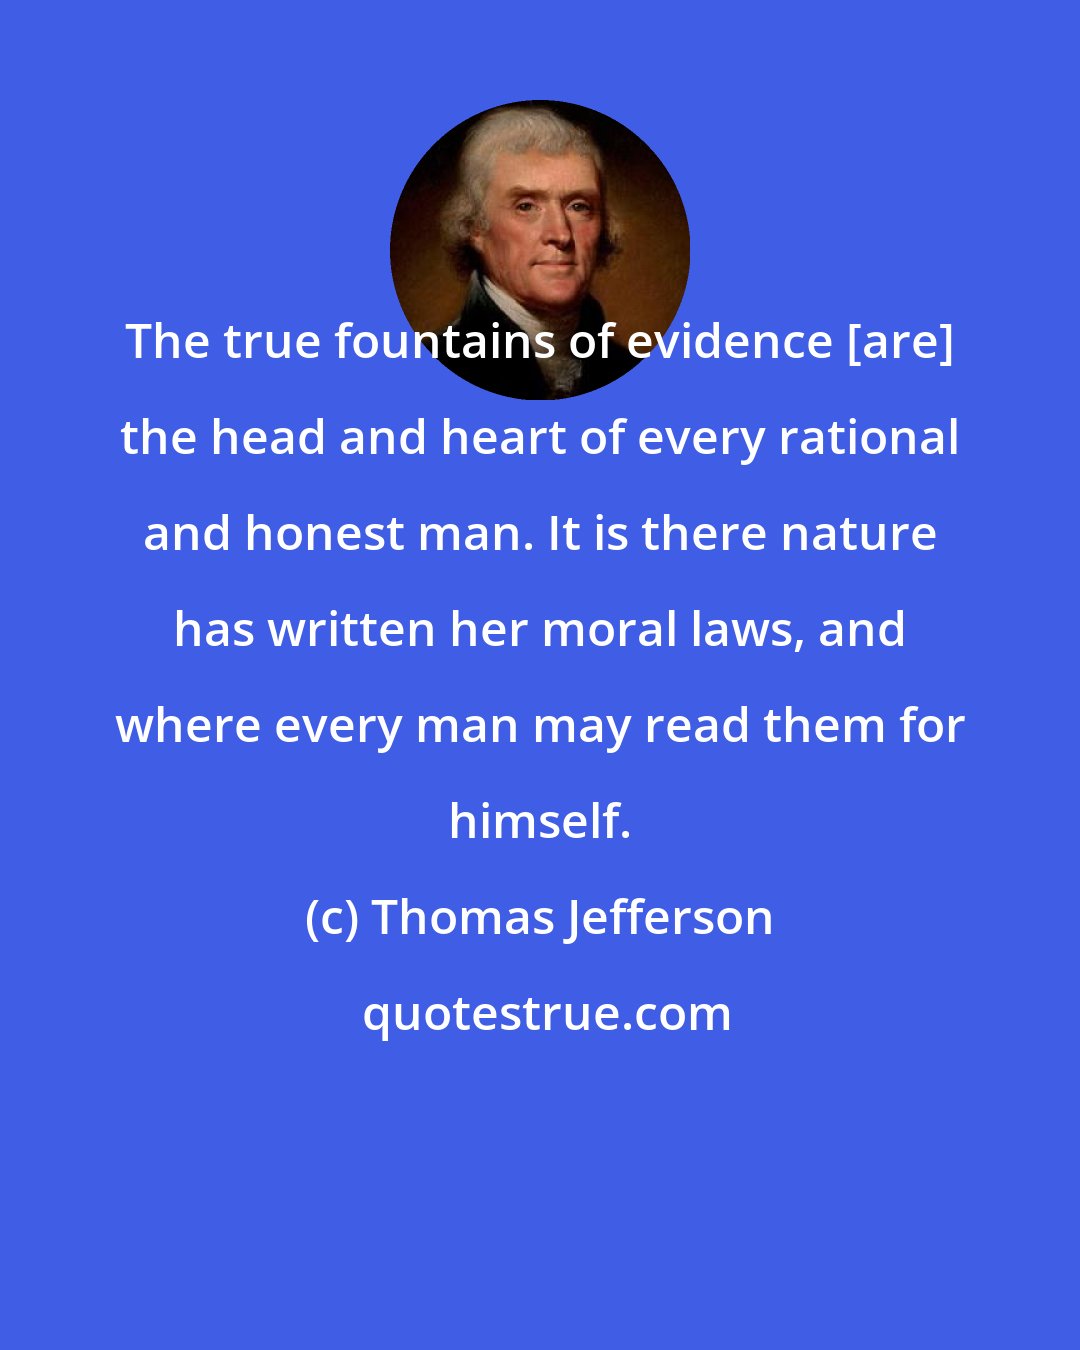 Thomas Jefferson: The true fountains of evidence [are] the head and heart of every rational and honest man. It is there nature has written her moral laws, and where every man may read them for himself.